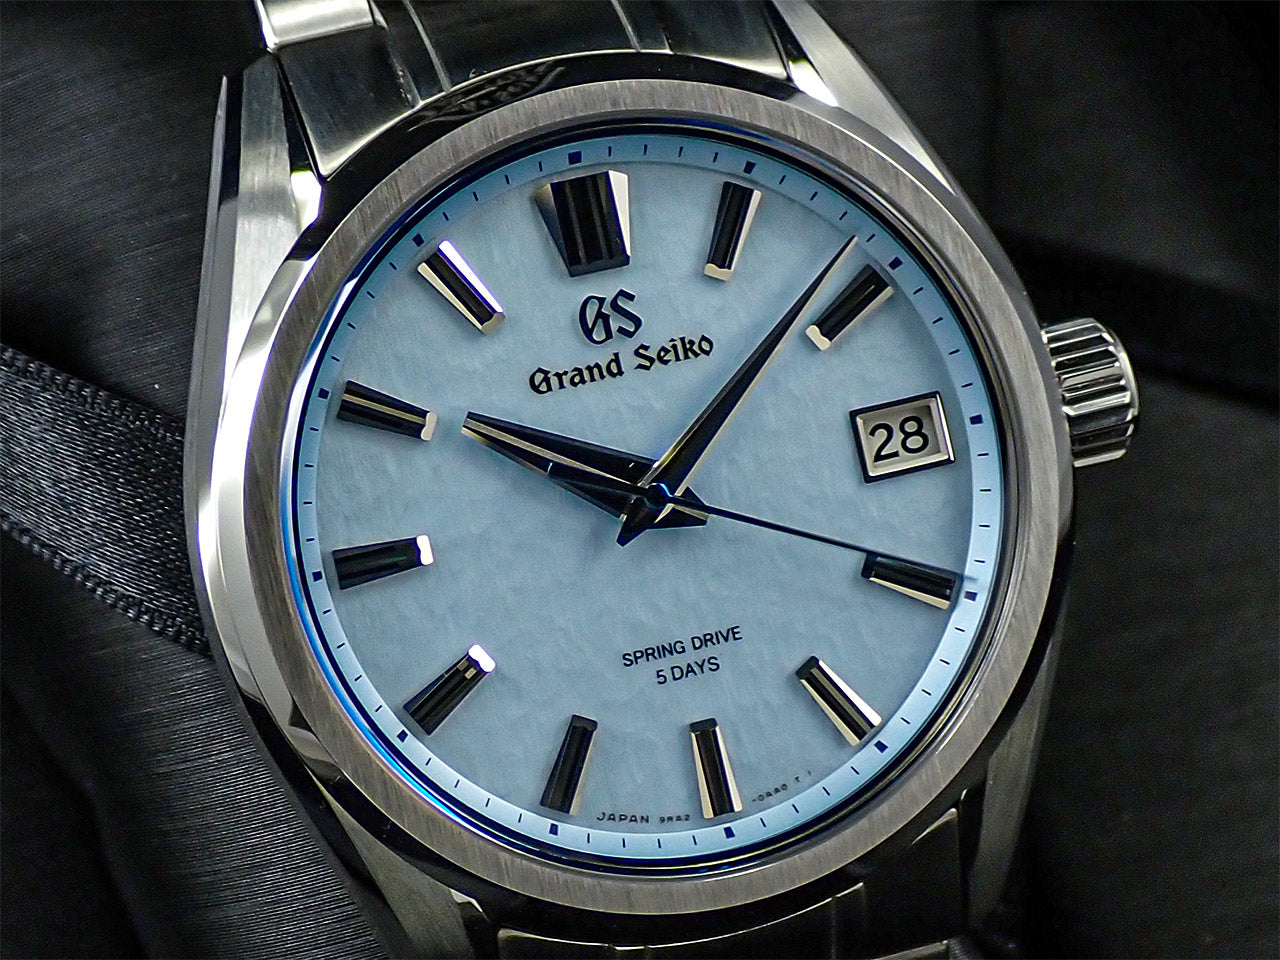 Grand Seiko Evolution 9 Collection AJHH Special Limited Edition &lt;Warranty, Box, etc.&gt;